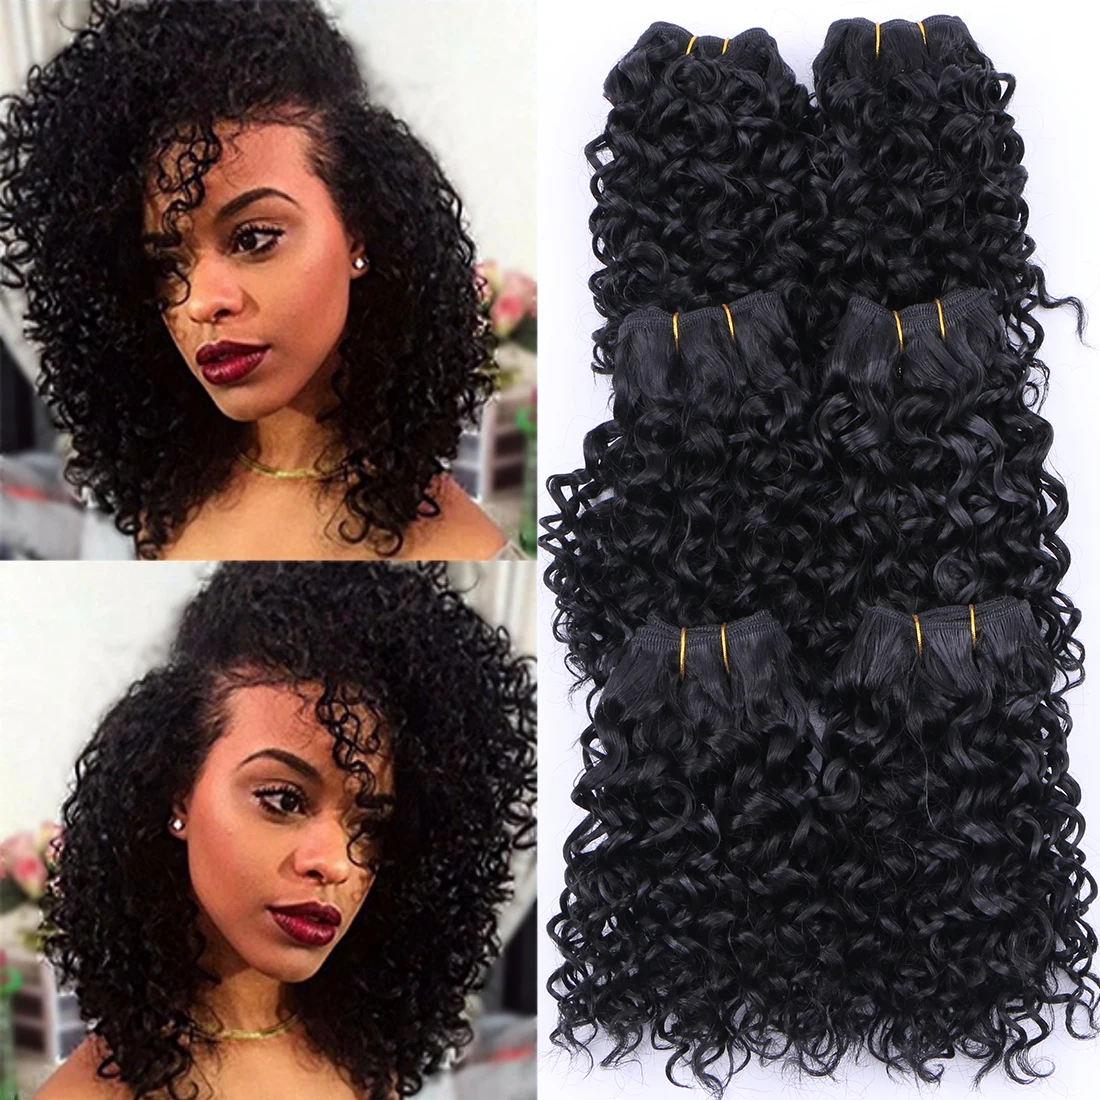 

REYNA Synthetic Kinky Curly Hair Extensions For Black Women High Temperature Fiber Weave Hair Bundles 6 Pieces One Set